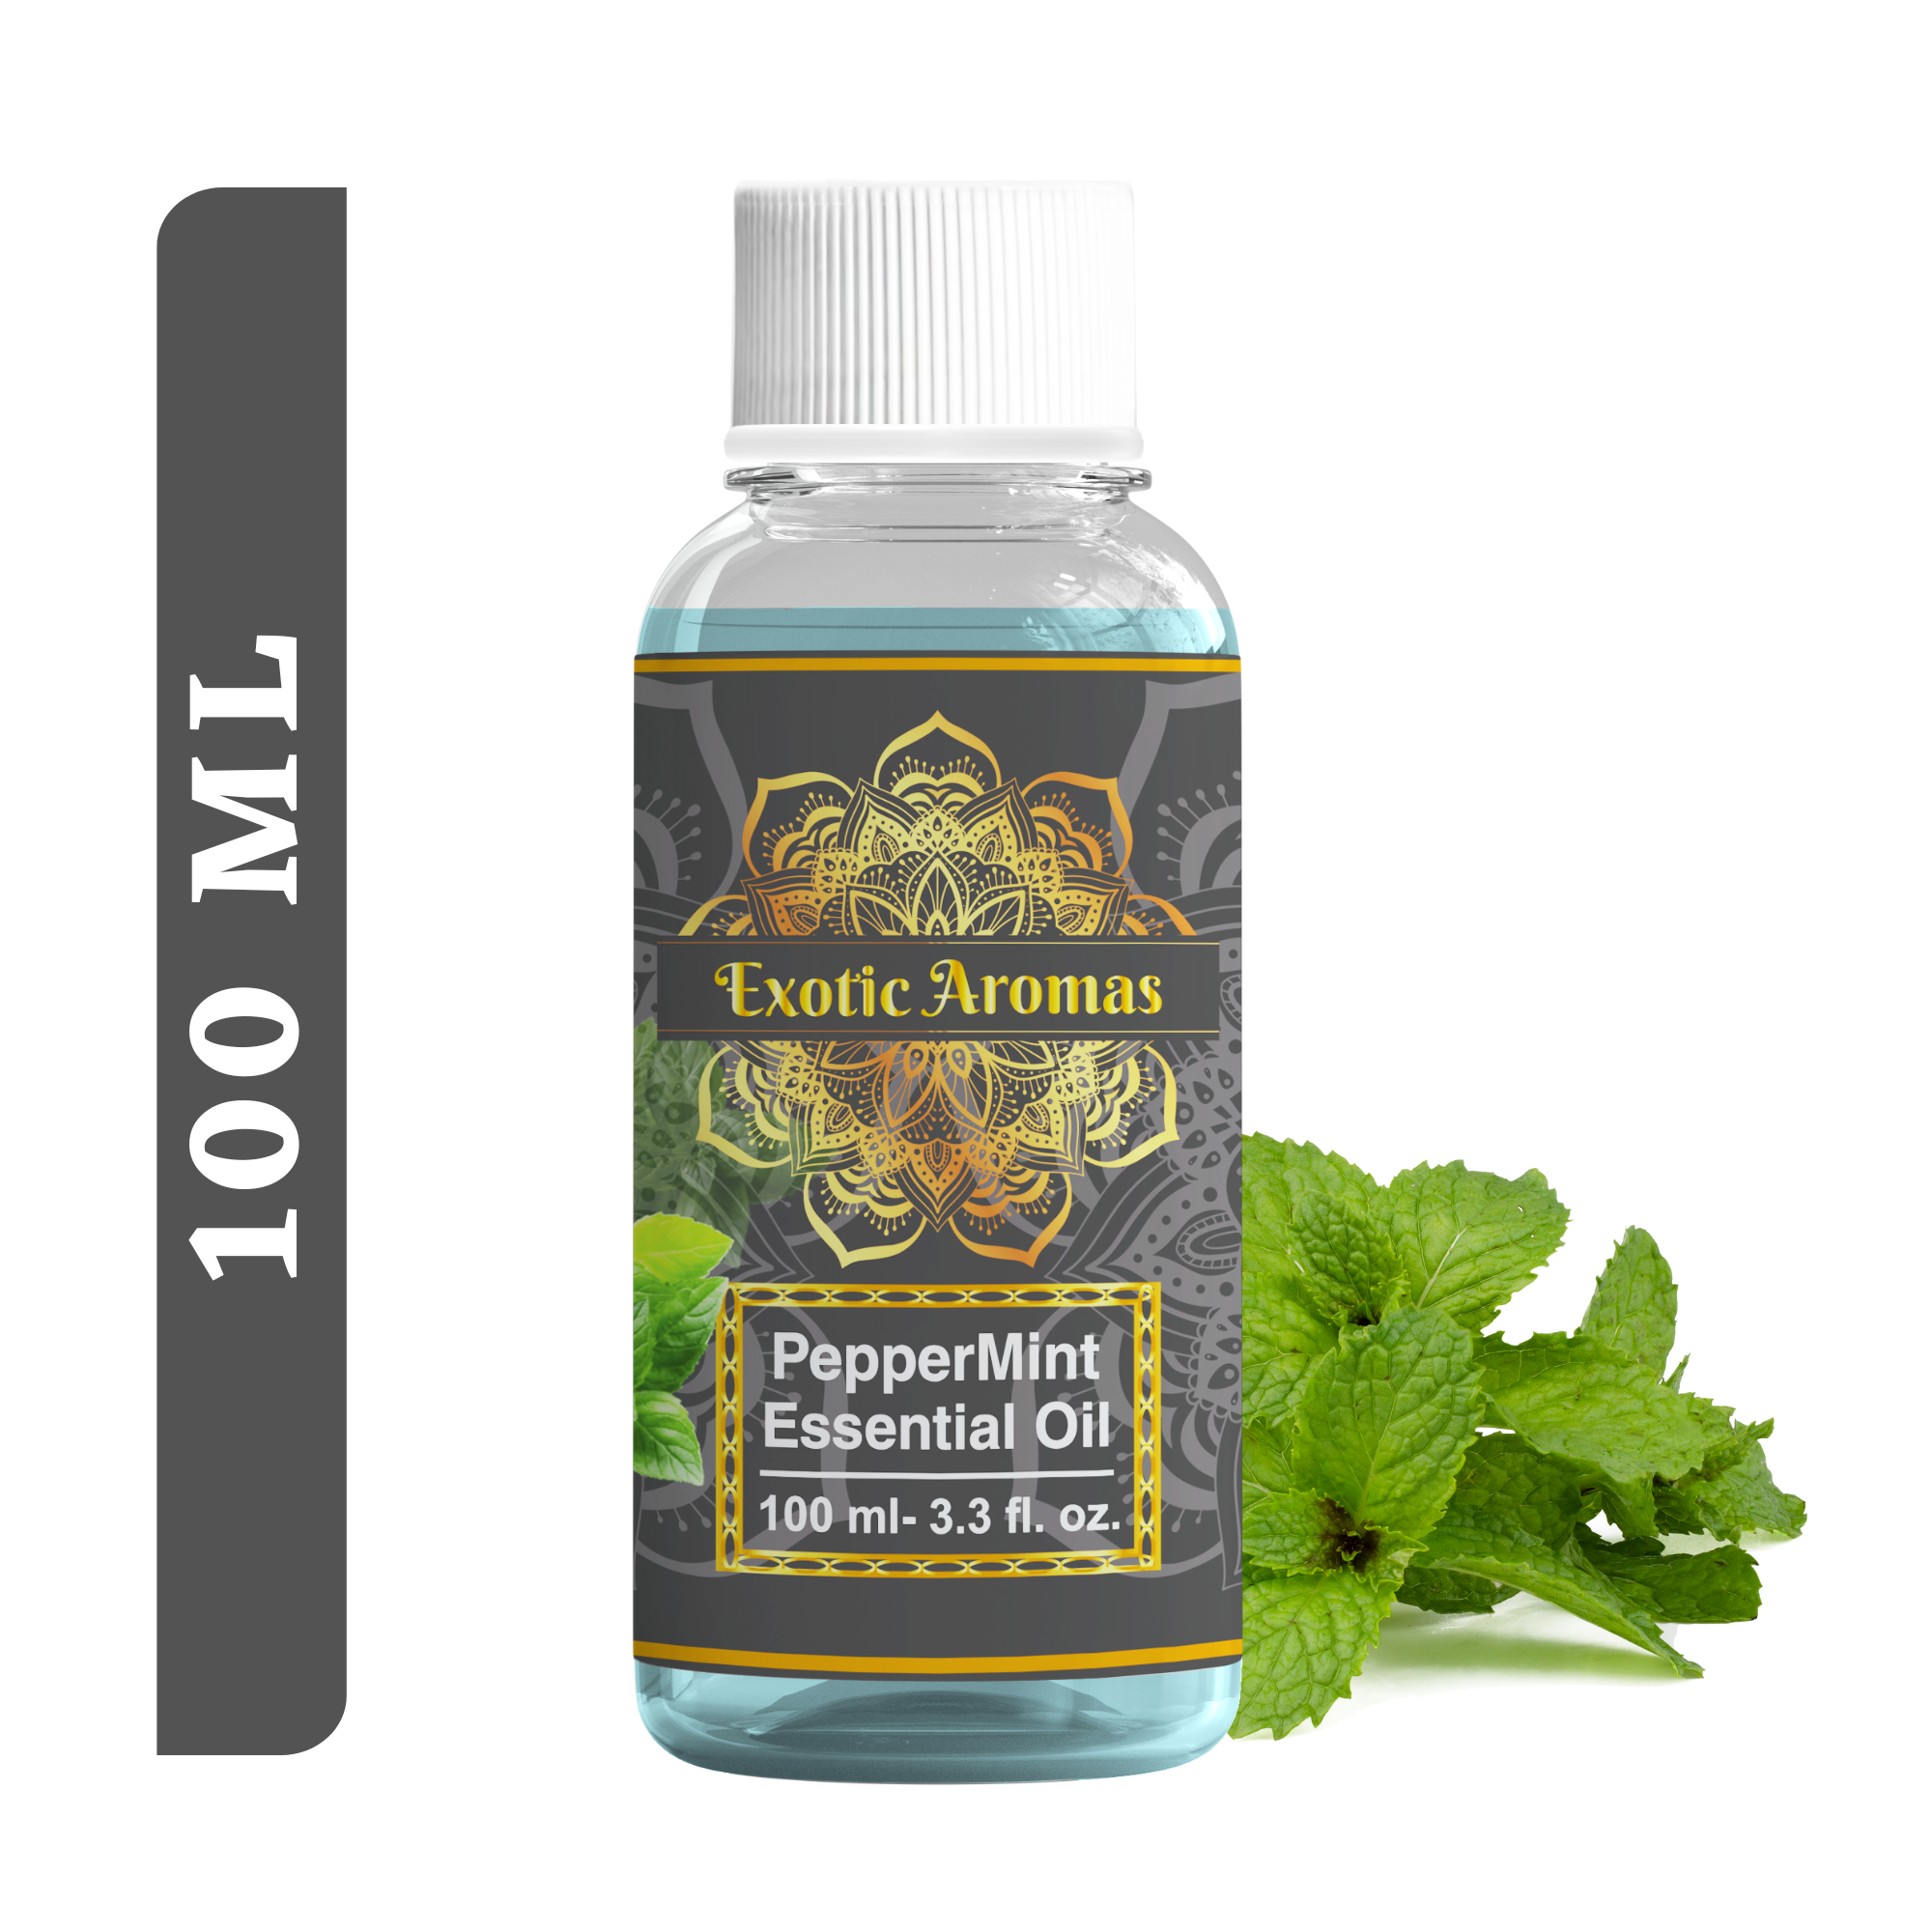 Peppermint Essential Oil for Aroma Therapy, Hair & Skin